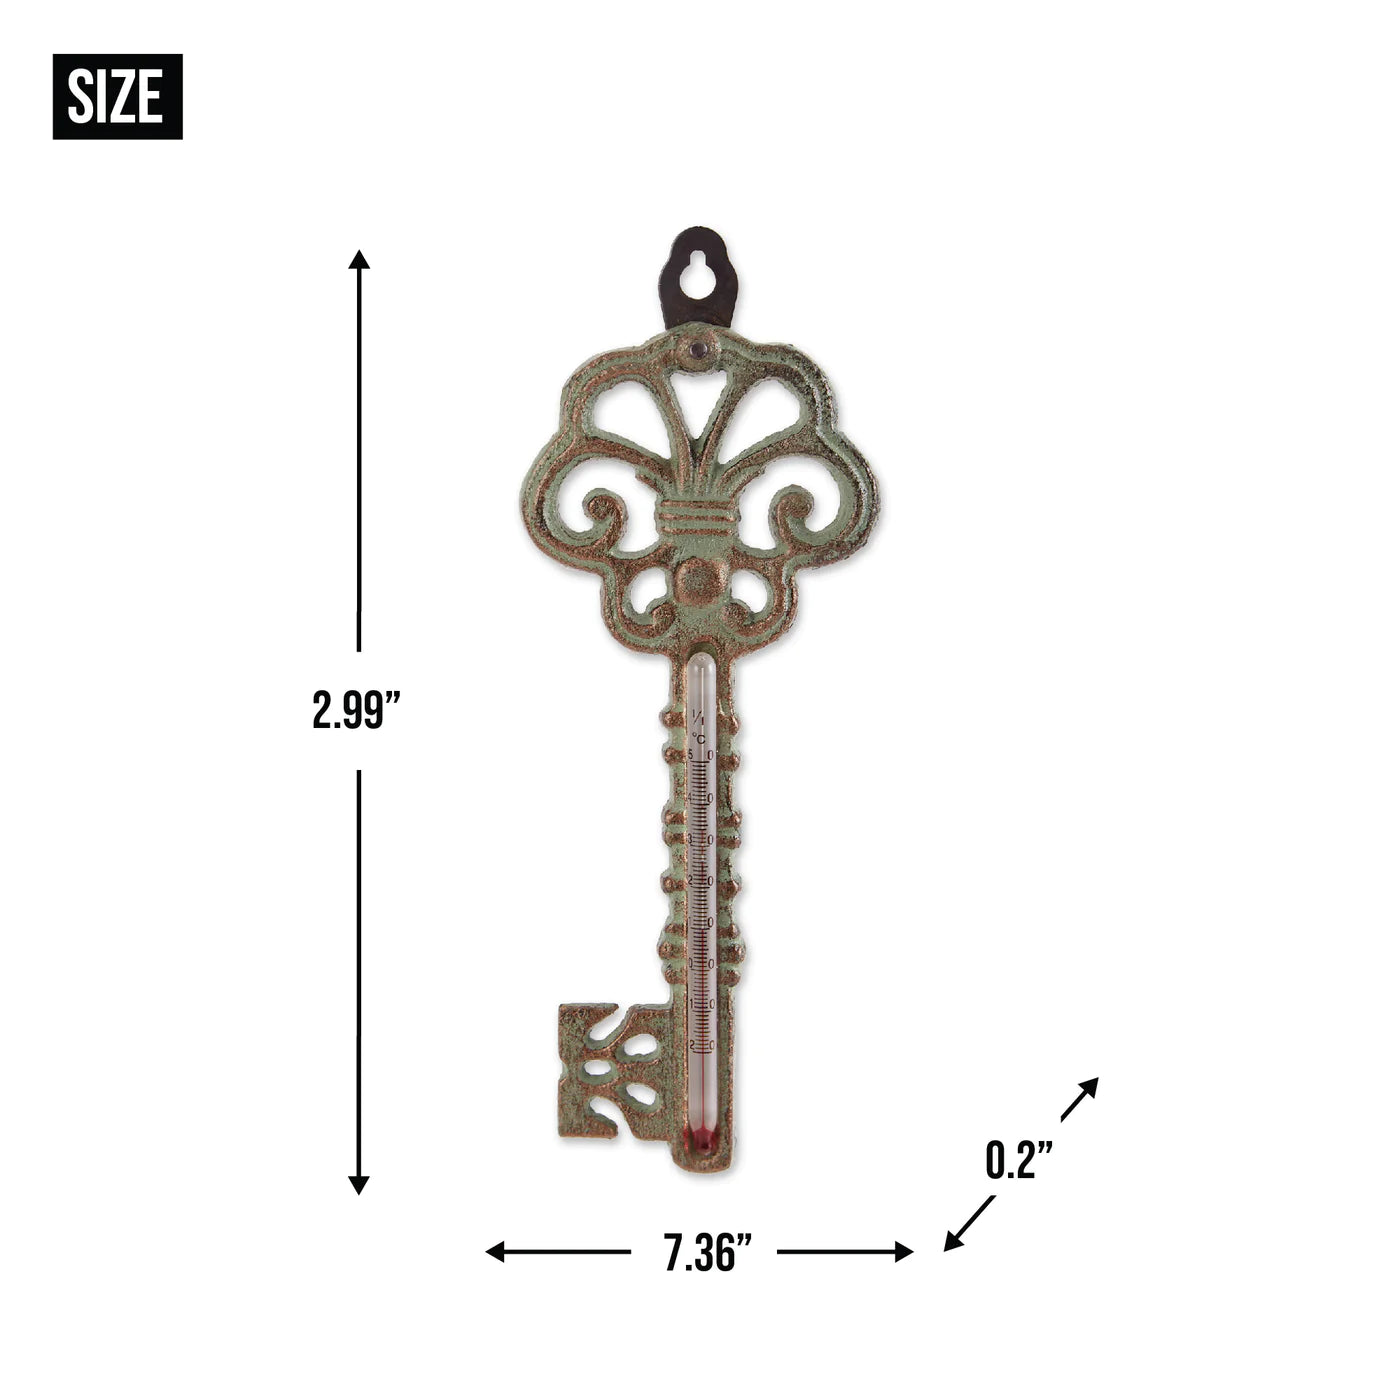 Antique Key Cast Iron Wall Thermometer